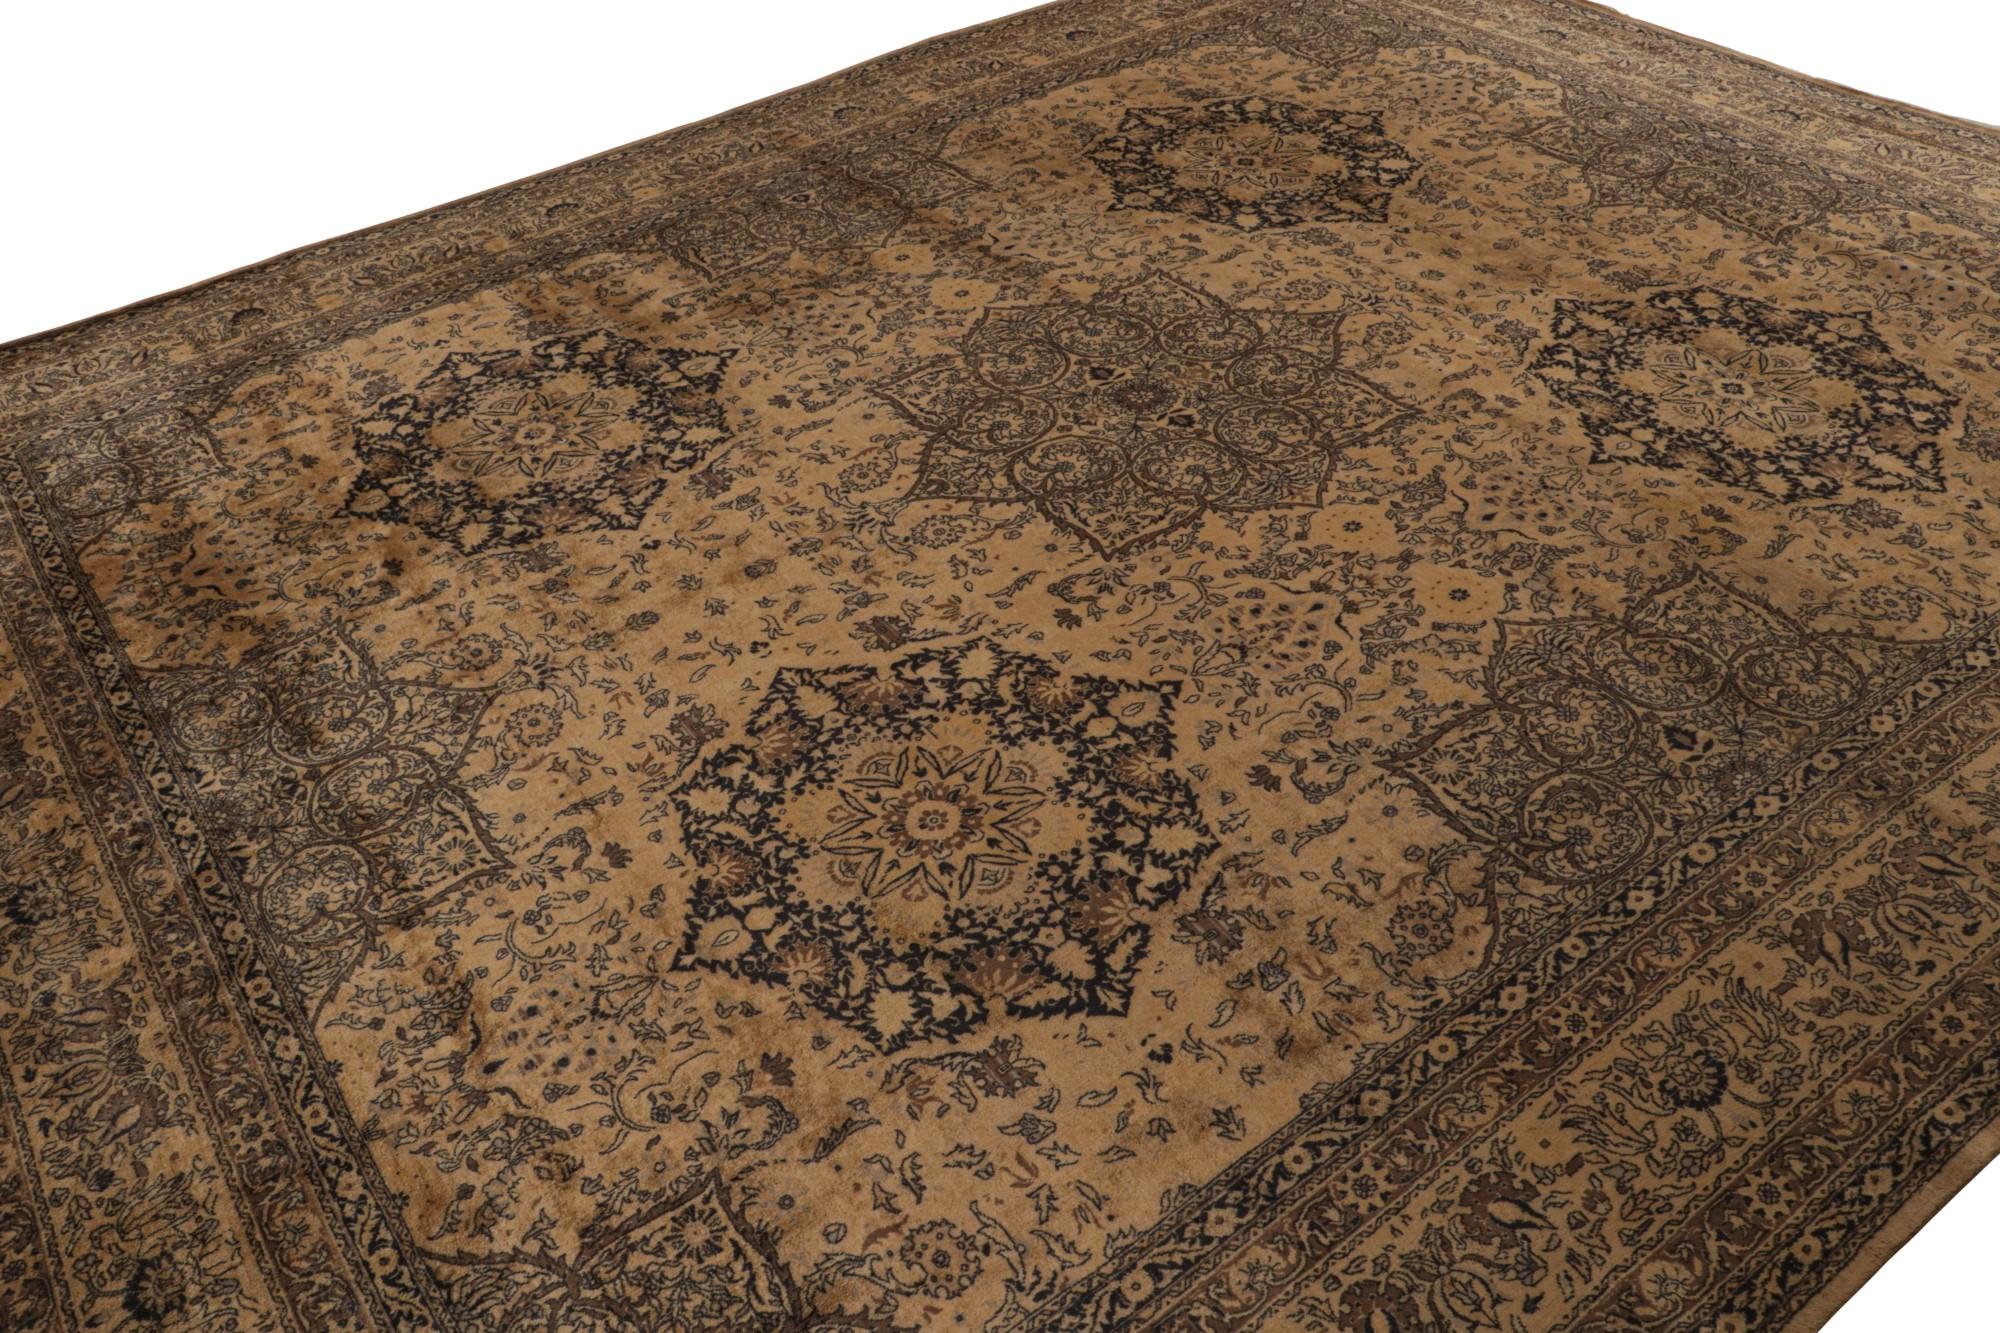 Hand-knotted in wool, this 11x13 antique Persian Tabriz rug features a brown field with black patterns, and gold and bronze undertones. It's a true masterpiece of fine detail for its size, scale and ultimate quality.  

On the design: 

Connoisseurs